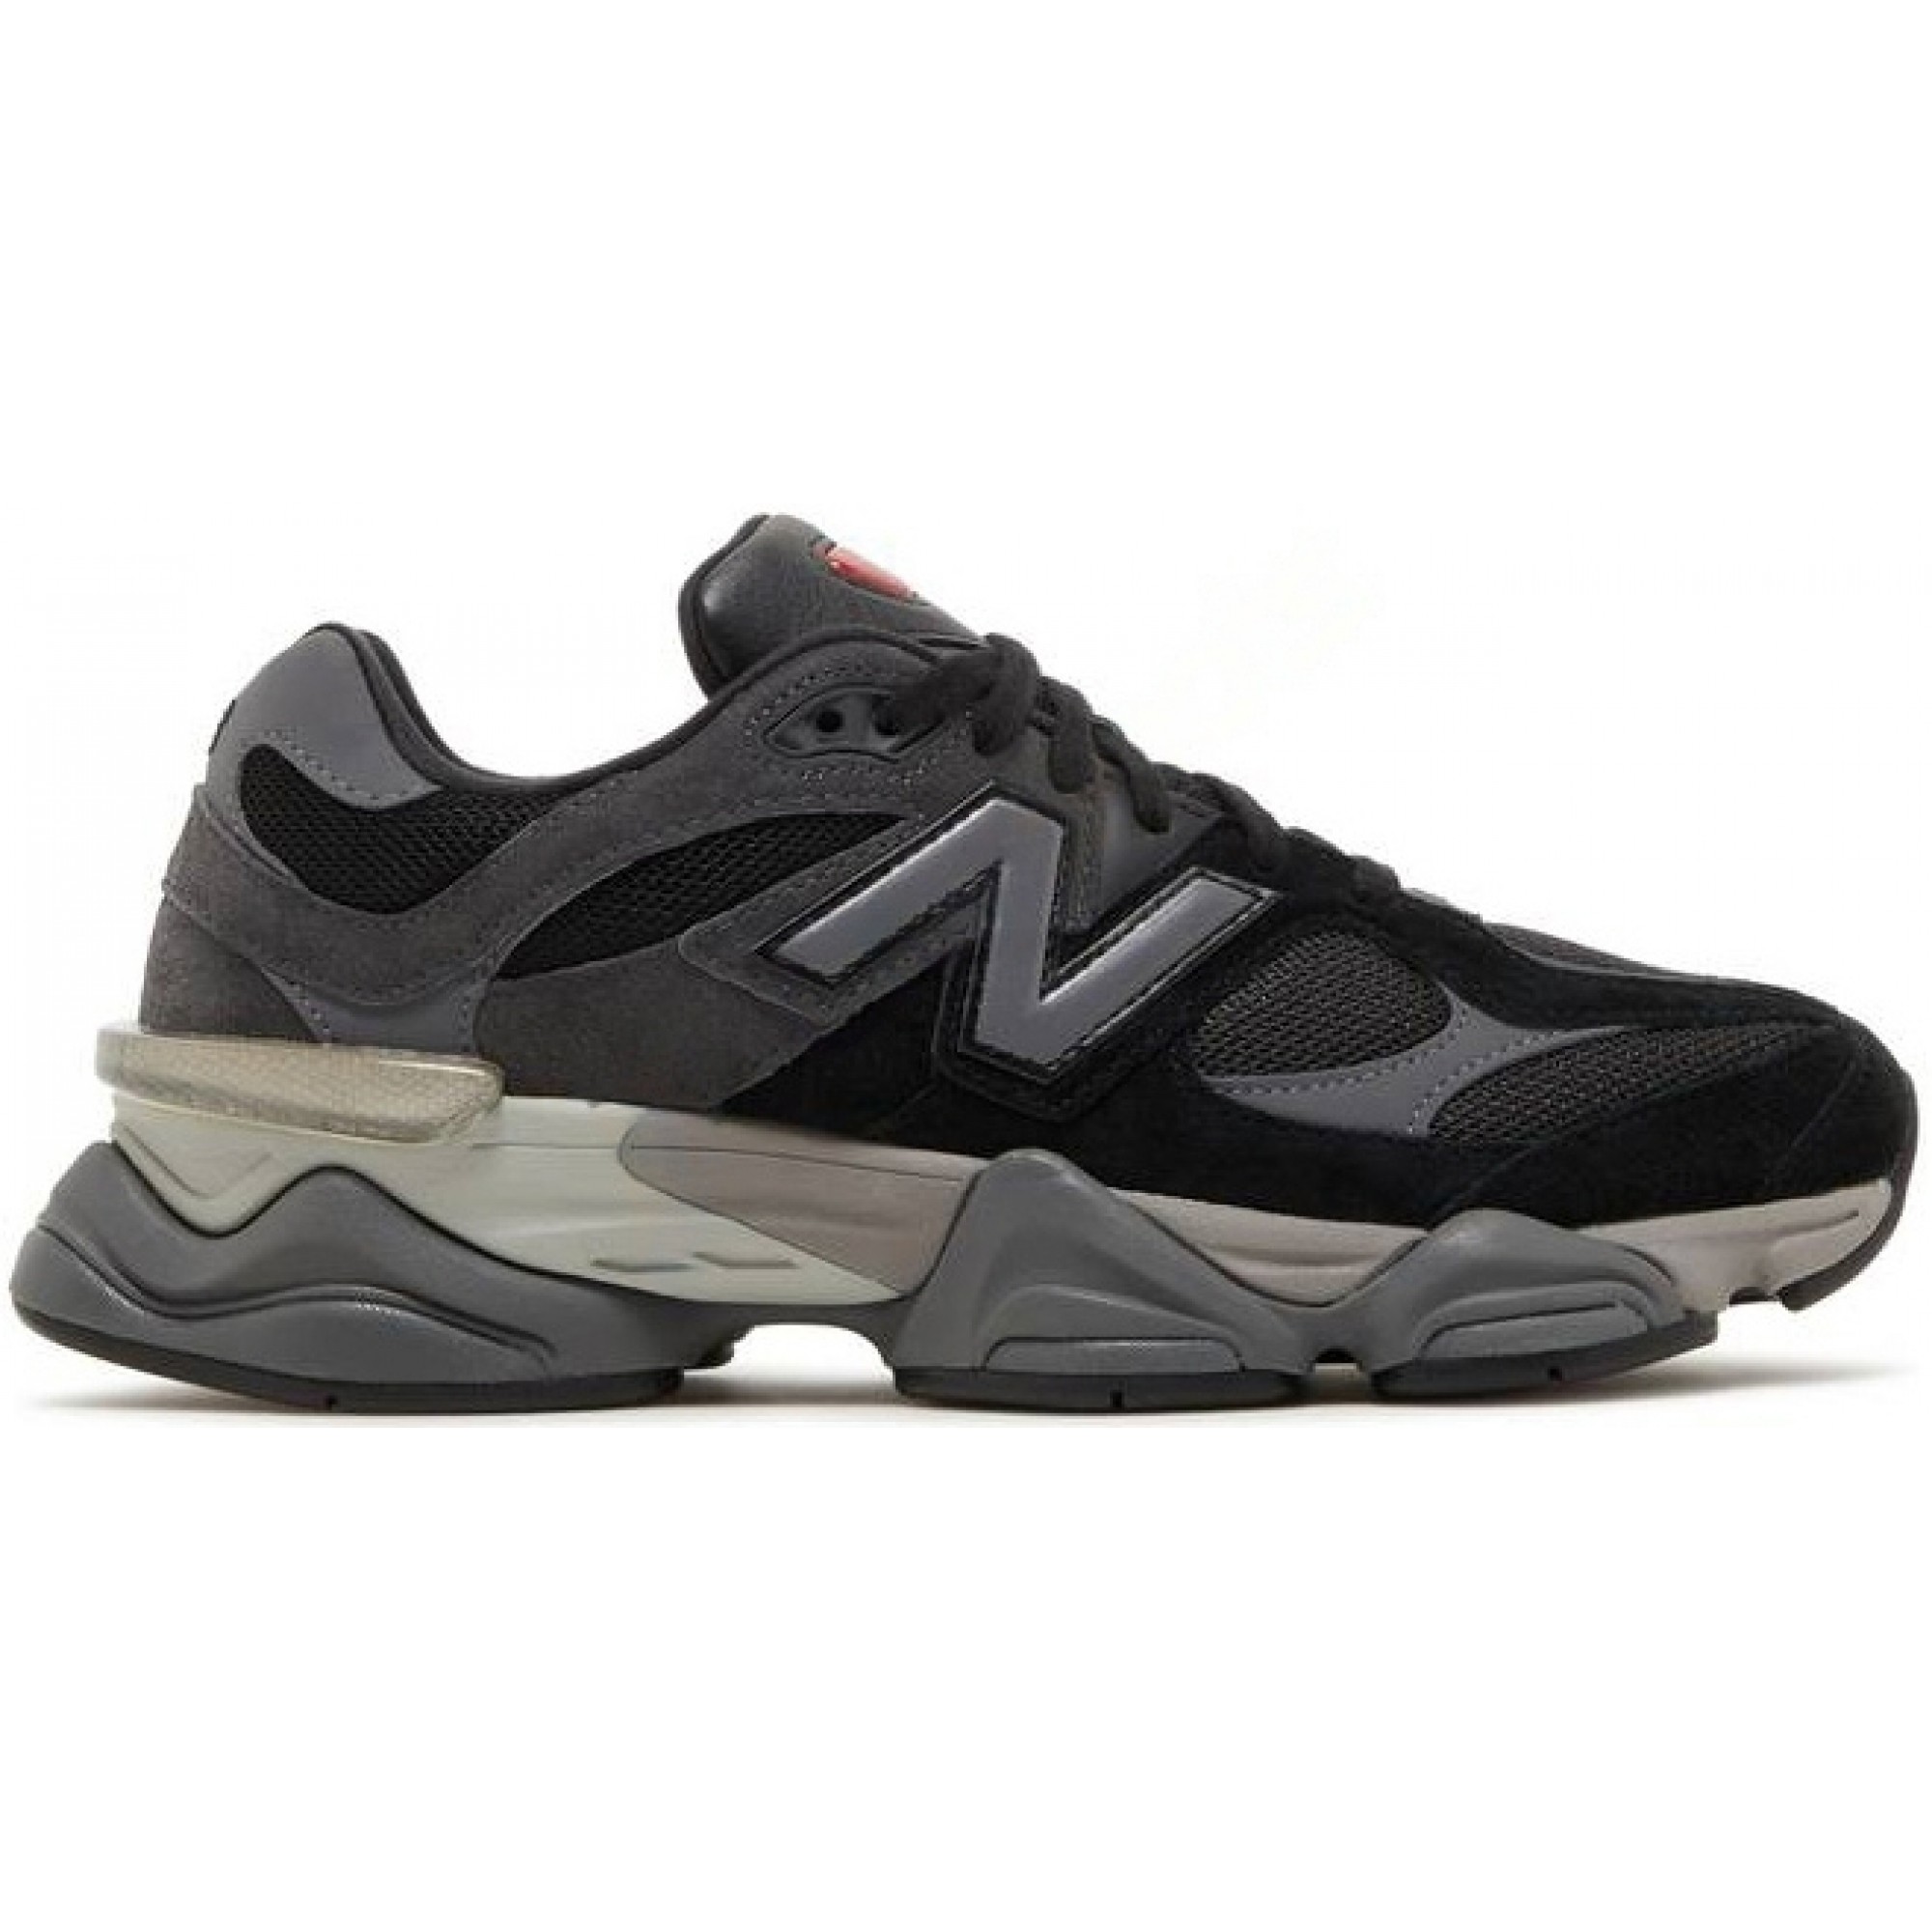 Step Up Your Style Game with These Sexy New Balance U9060 Sneakers!